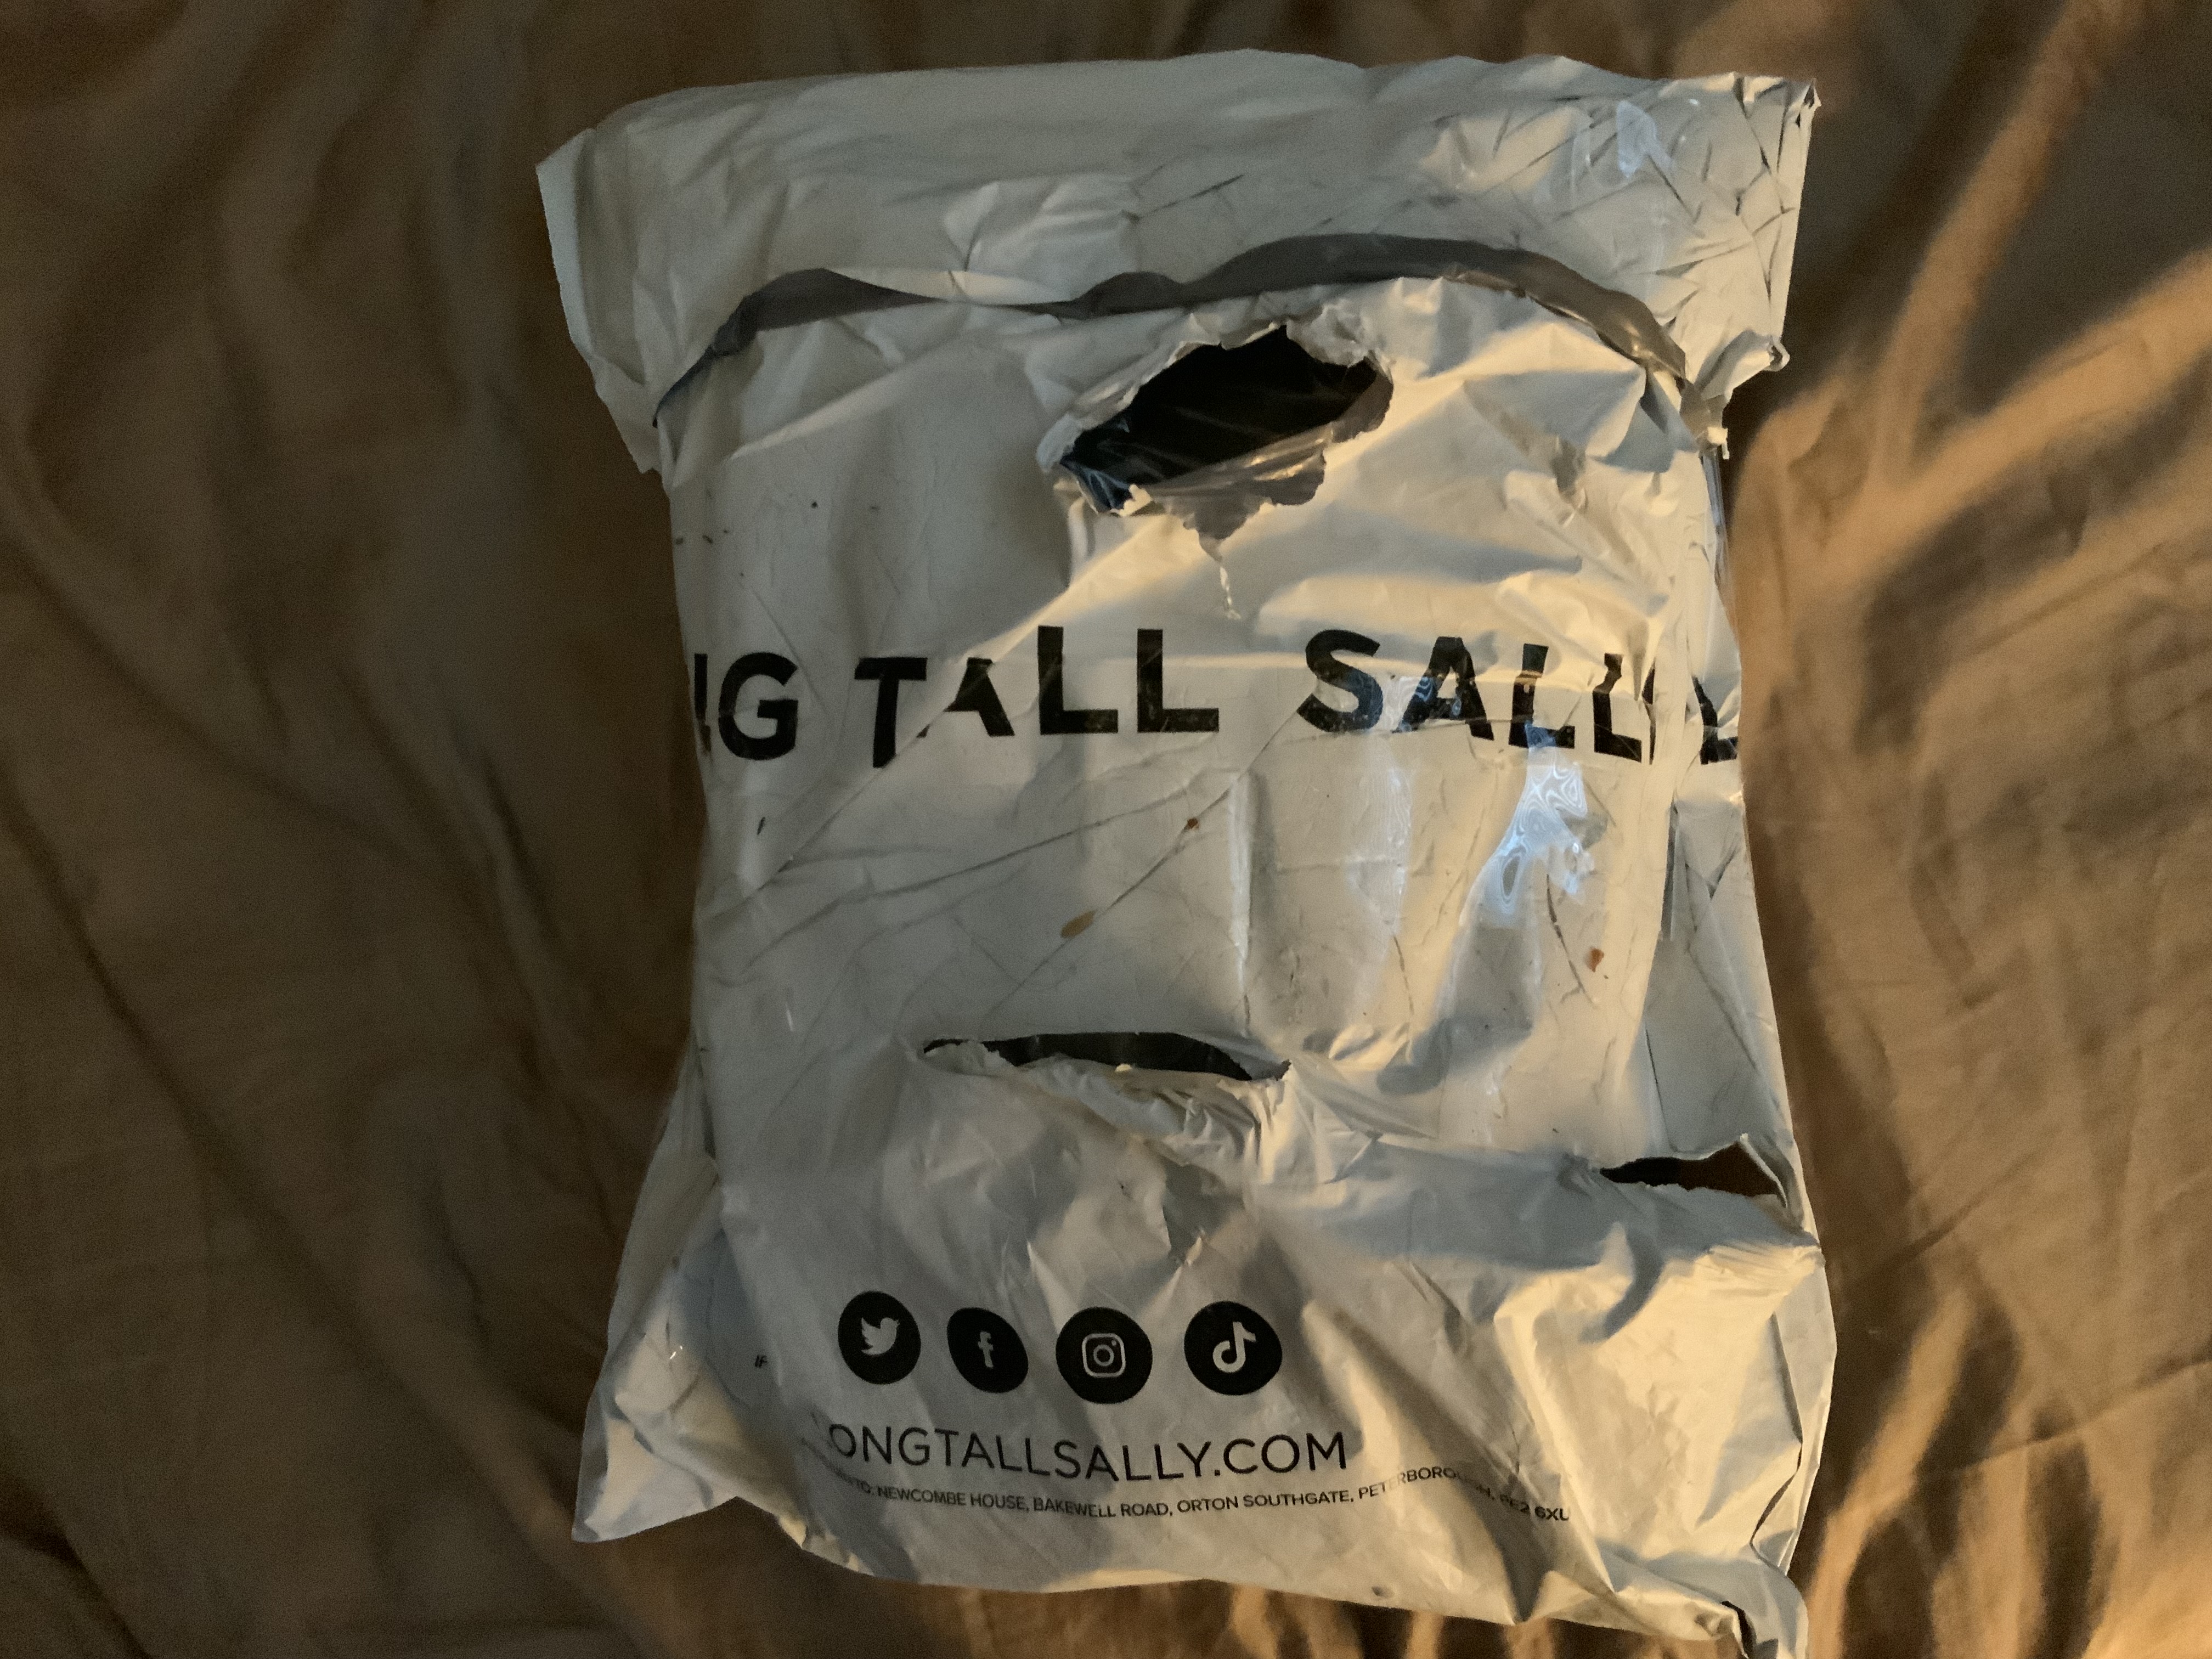 Is anyone familiar with the brand Long Tall Sally? I'm trying to